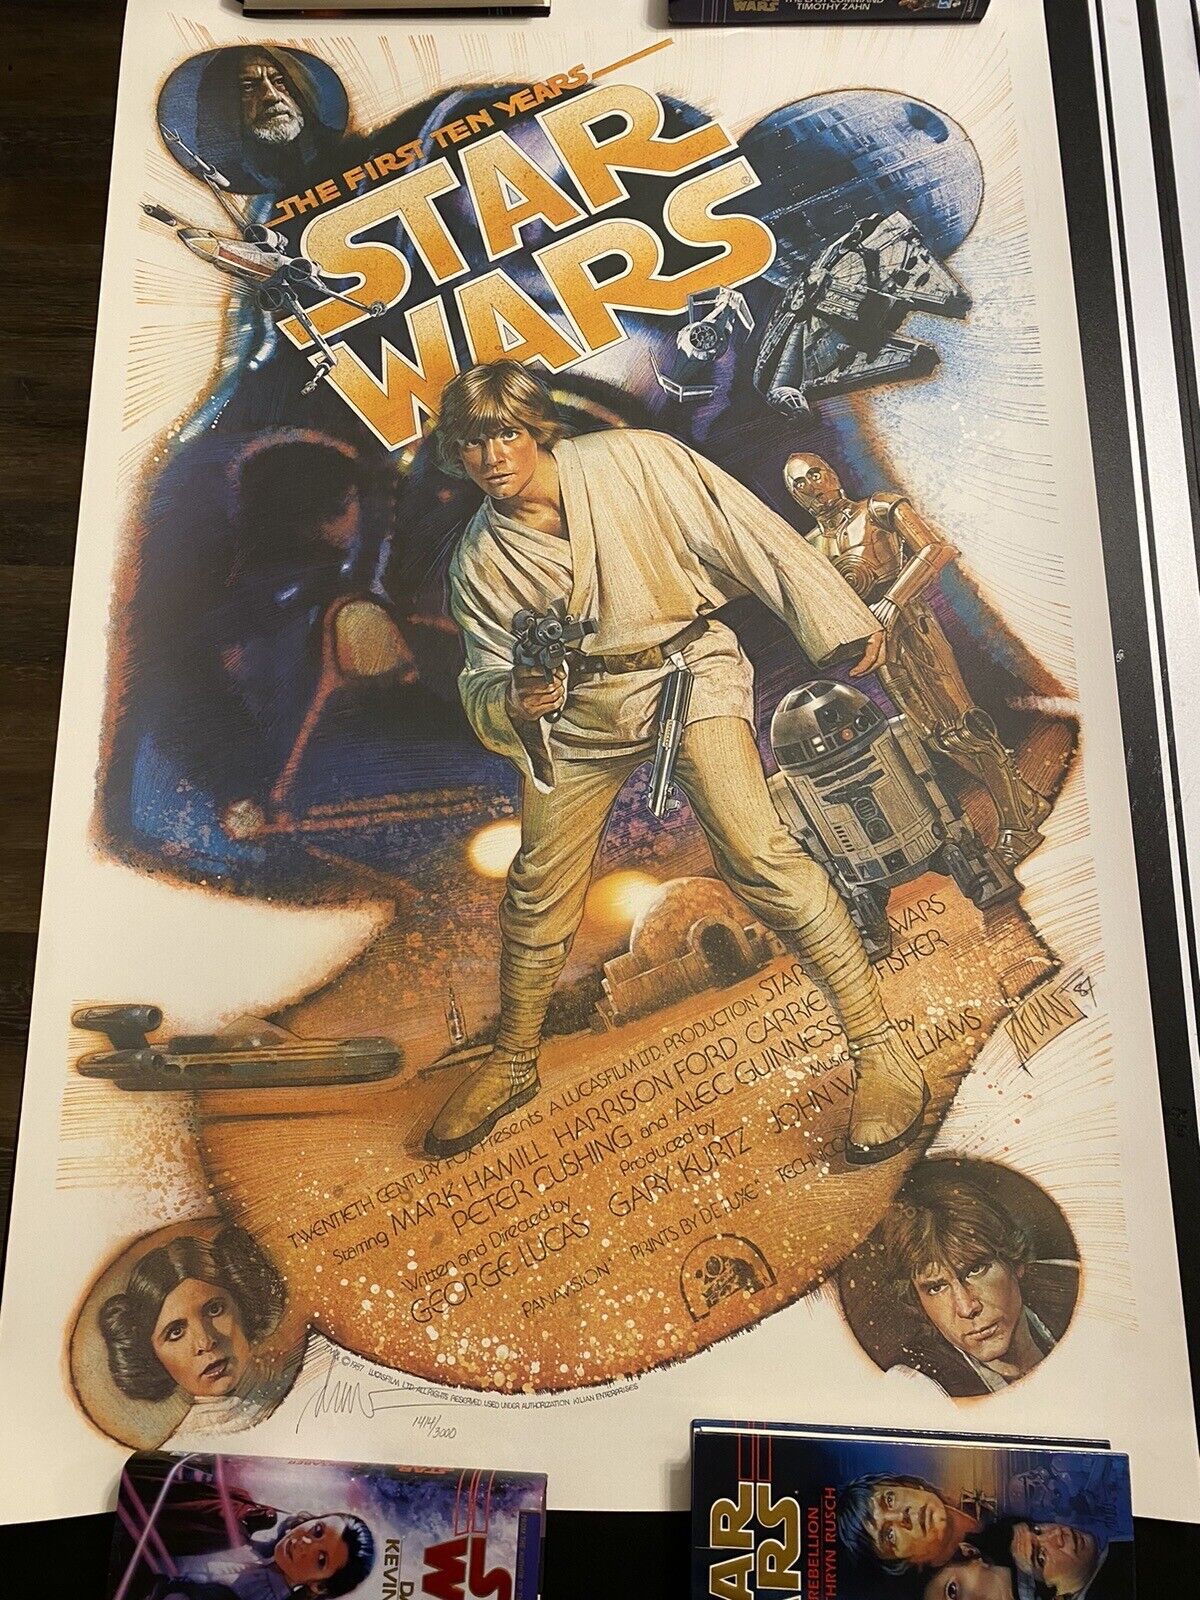 STAR WARS THE FIRST TEN YEARS POSTER 27x41 SIGNED KILIAN VERSION (1987)